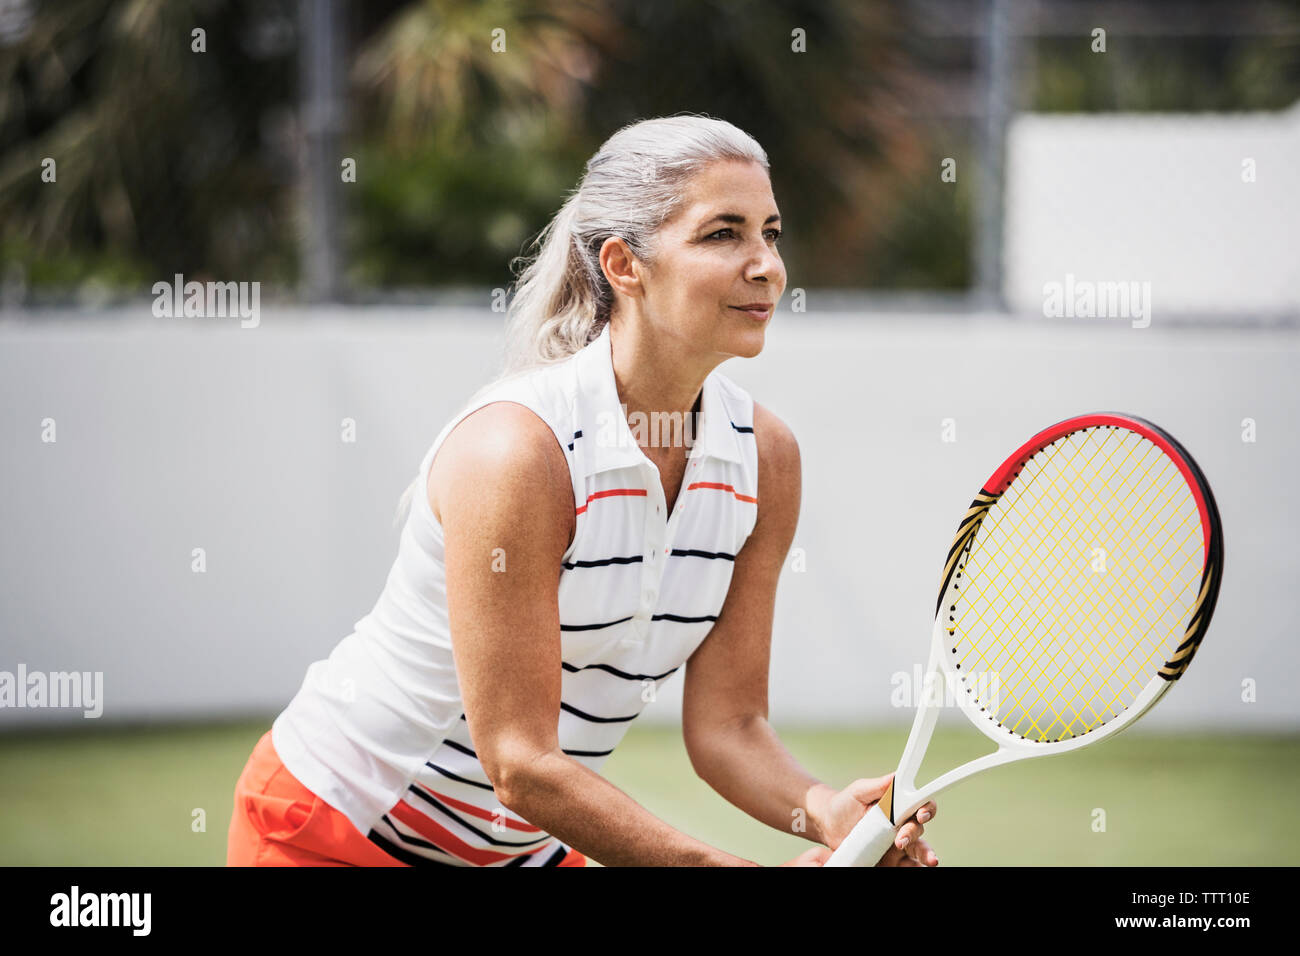 Determined mature woman playing tennis on court Stock Photo - Alamy